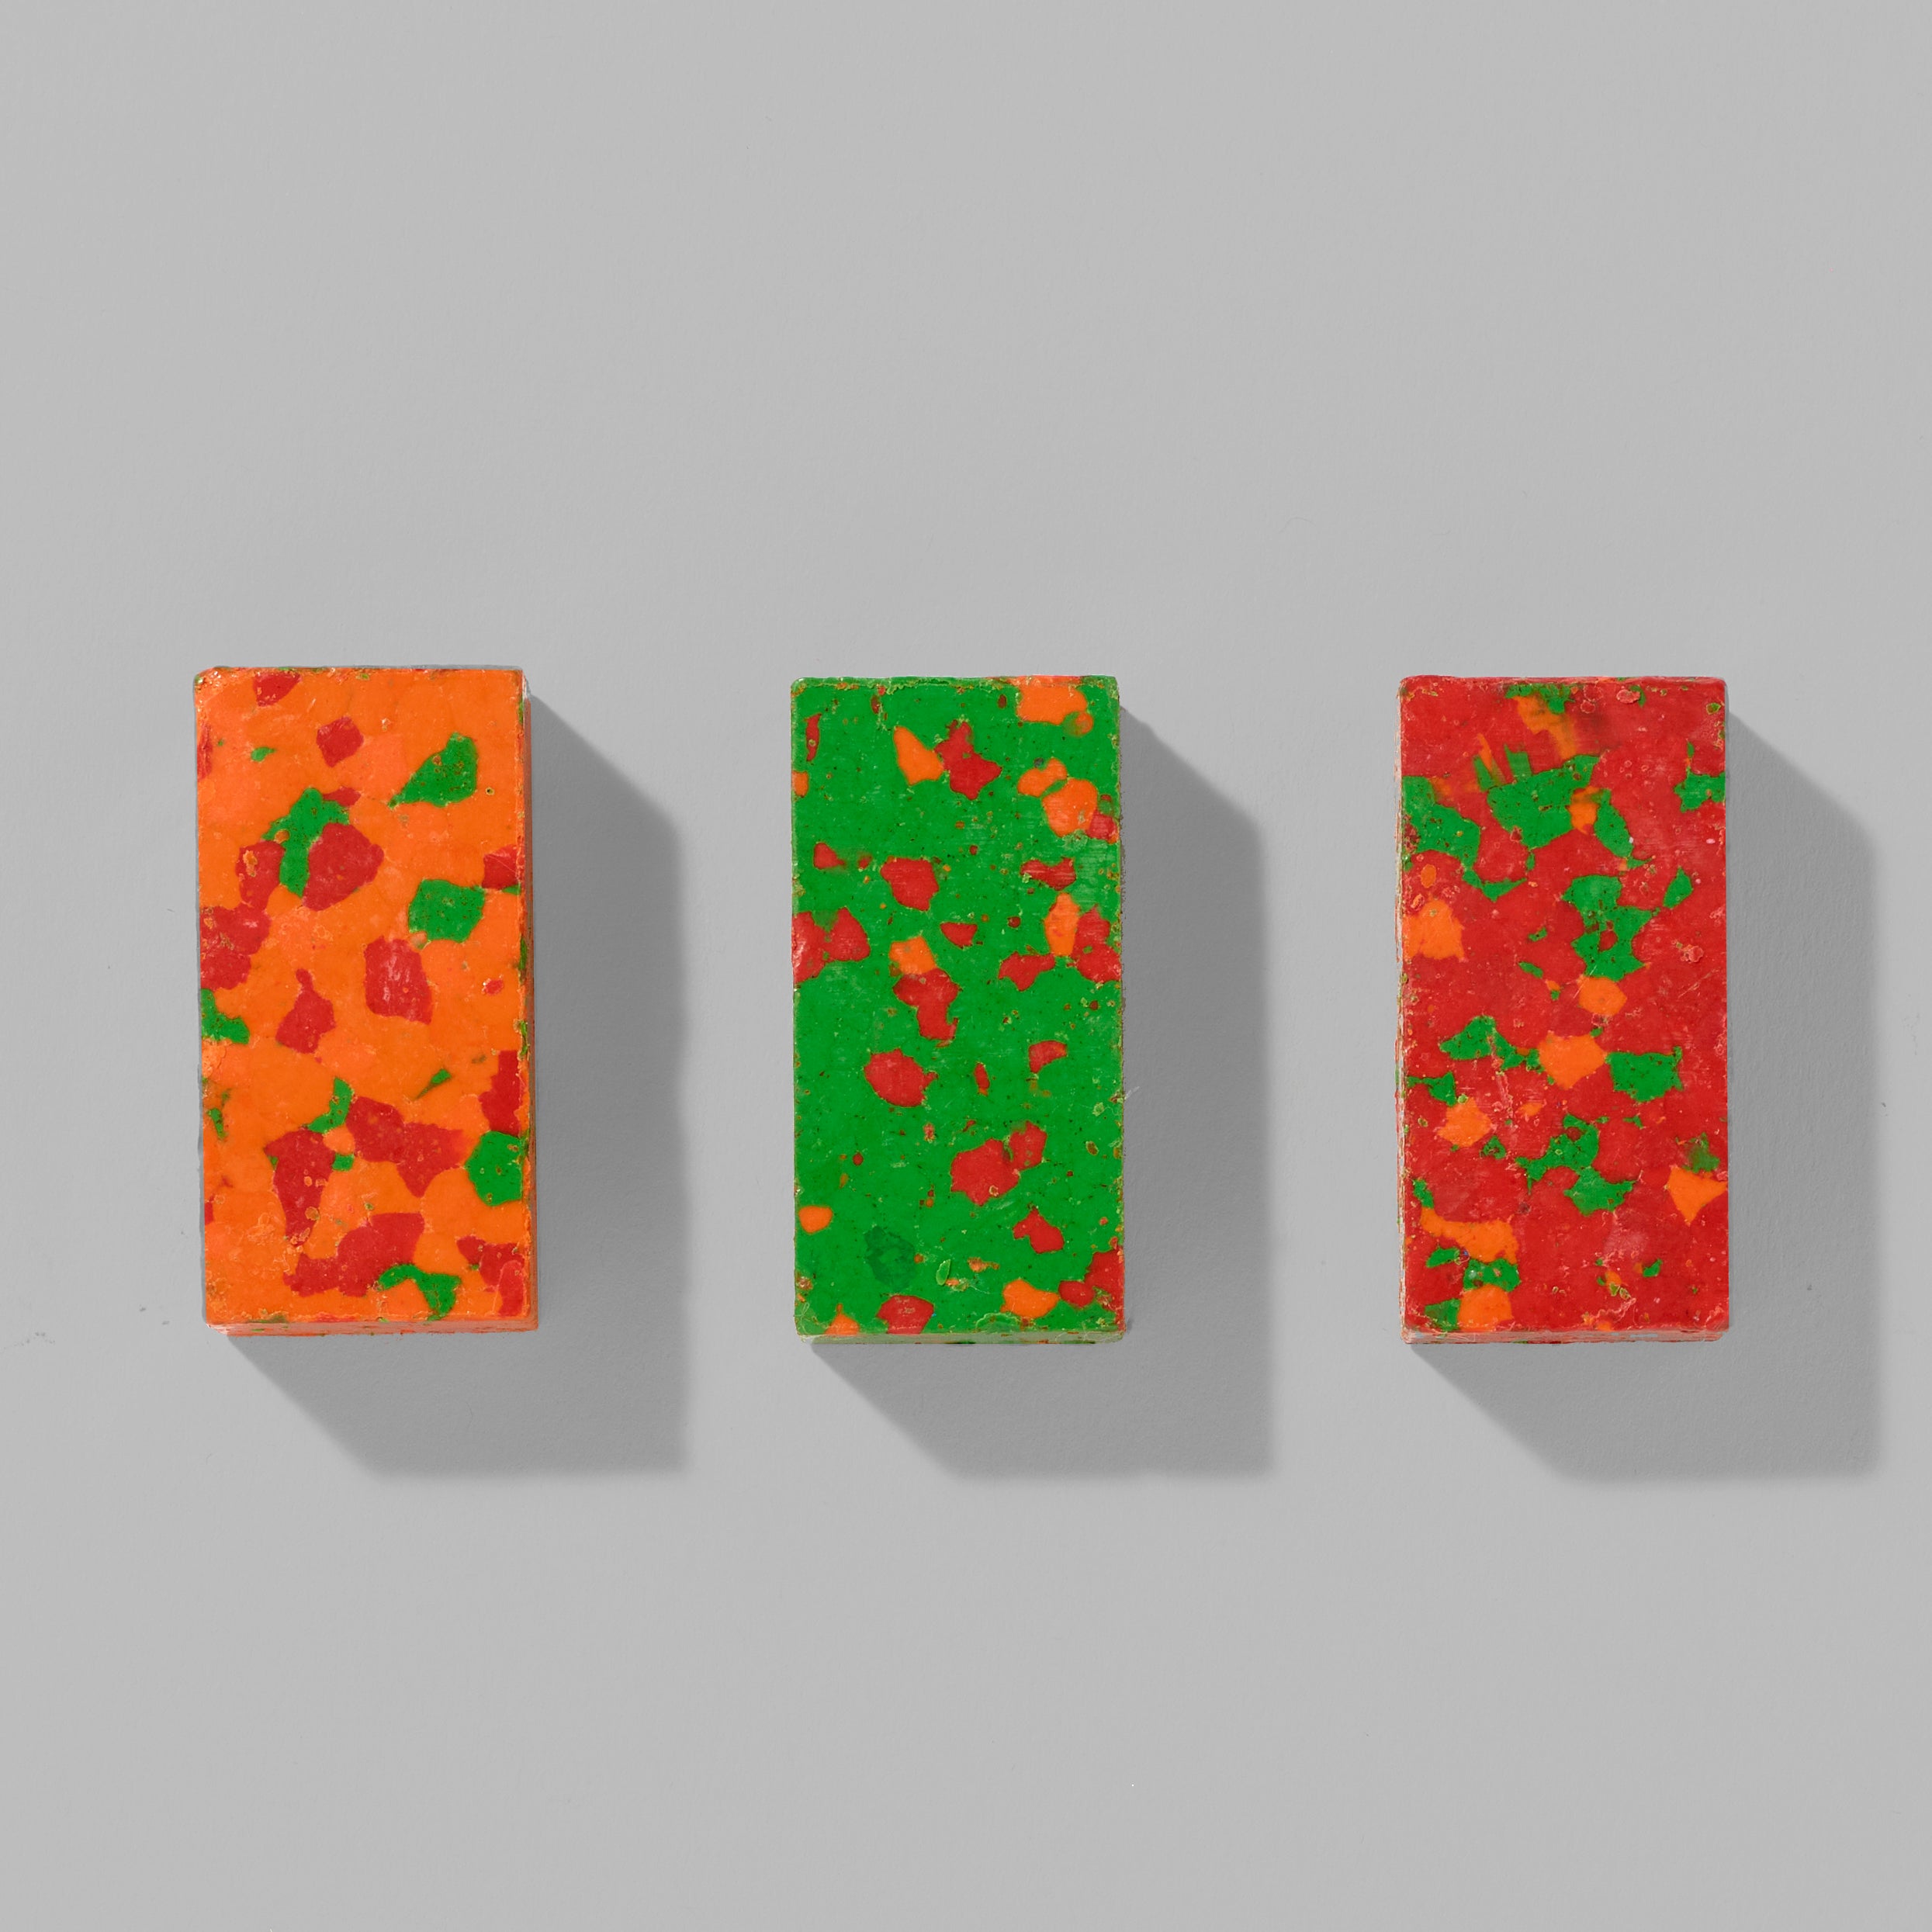 Set of 3 Biennial Crayons each measuring 1.5" x 1" in orange, green, and red